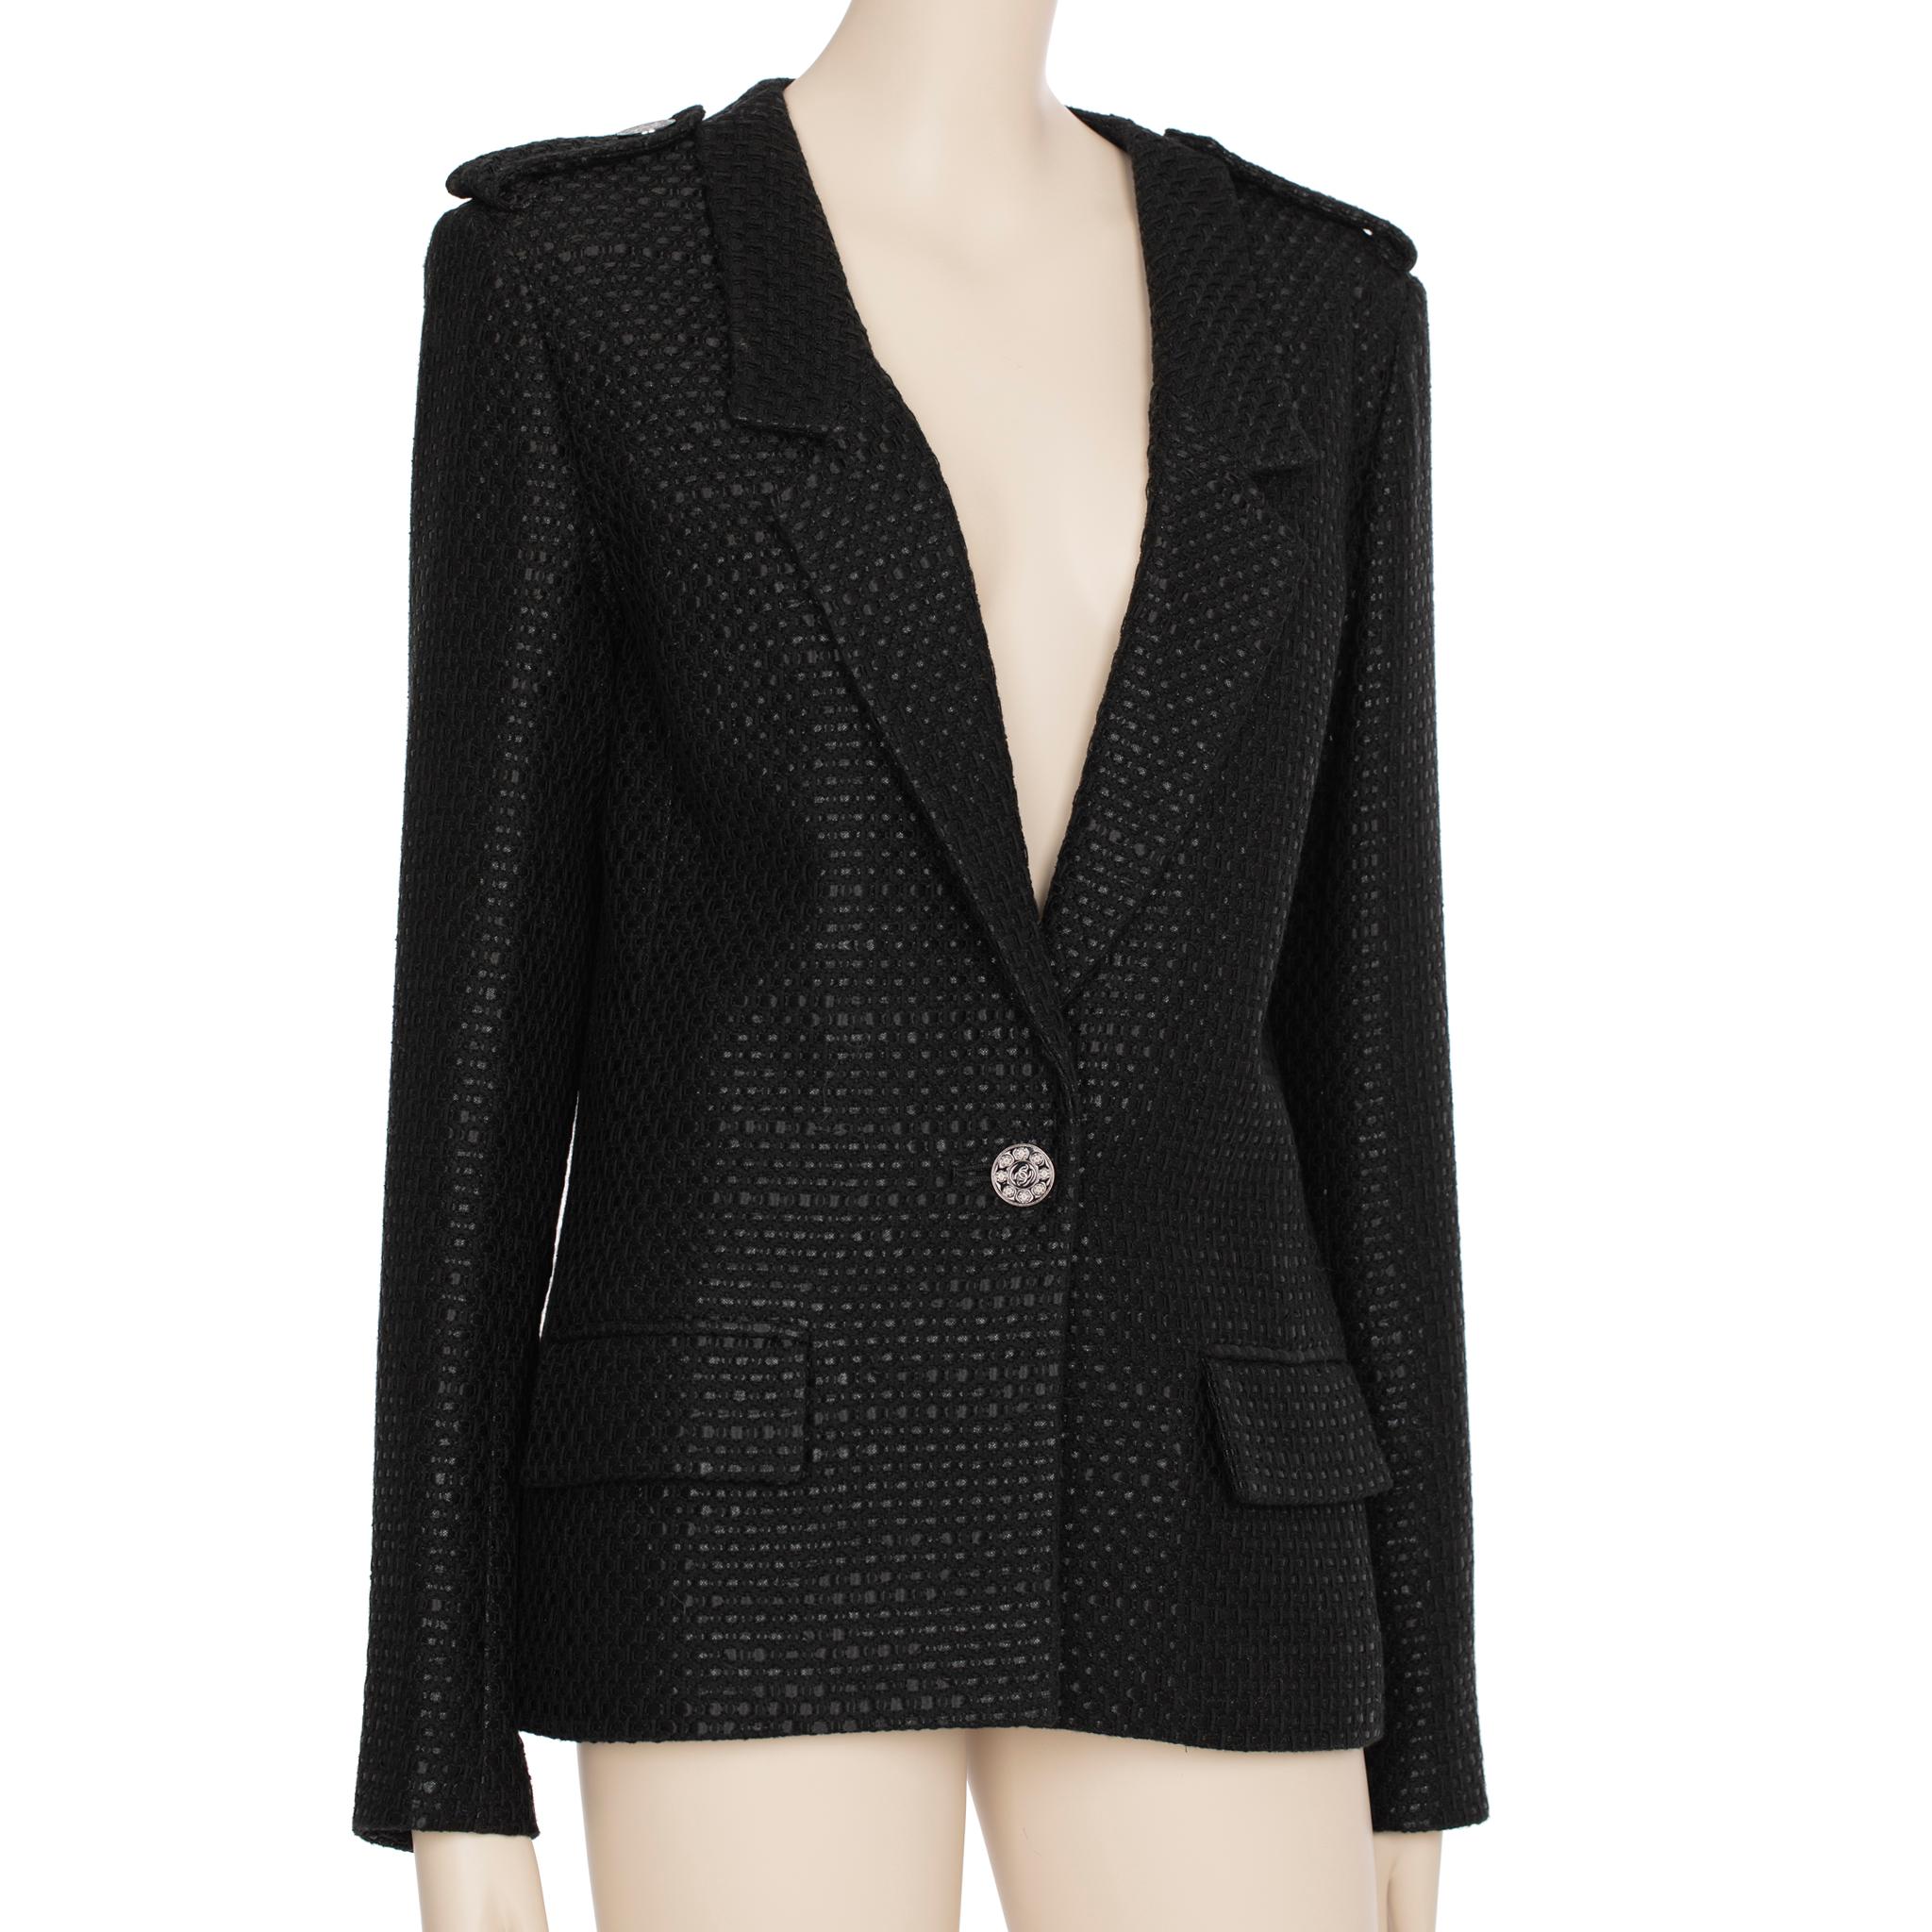 
Brand:

Chanel

Product:

Tweed Blazer Single Button 

Size:

42 Fr

Colour:

Black

Material:

Outer: 70% Cotton & 30% Polyester

Lining: 100% Silk

Product Code:

P53079V39572

Condition:

Excellent:

The product is in excellent condition,